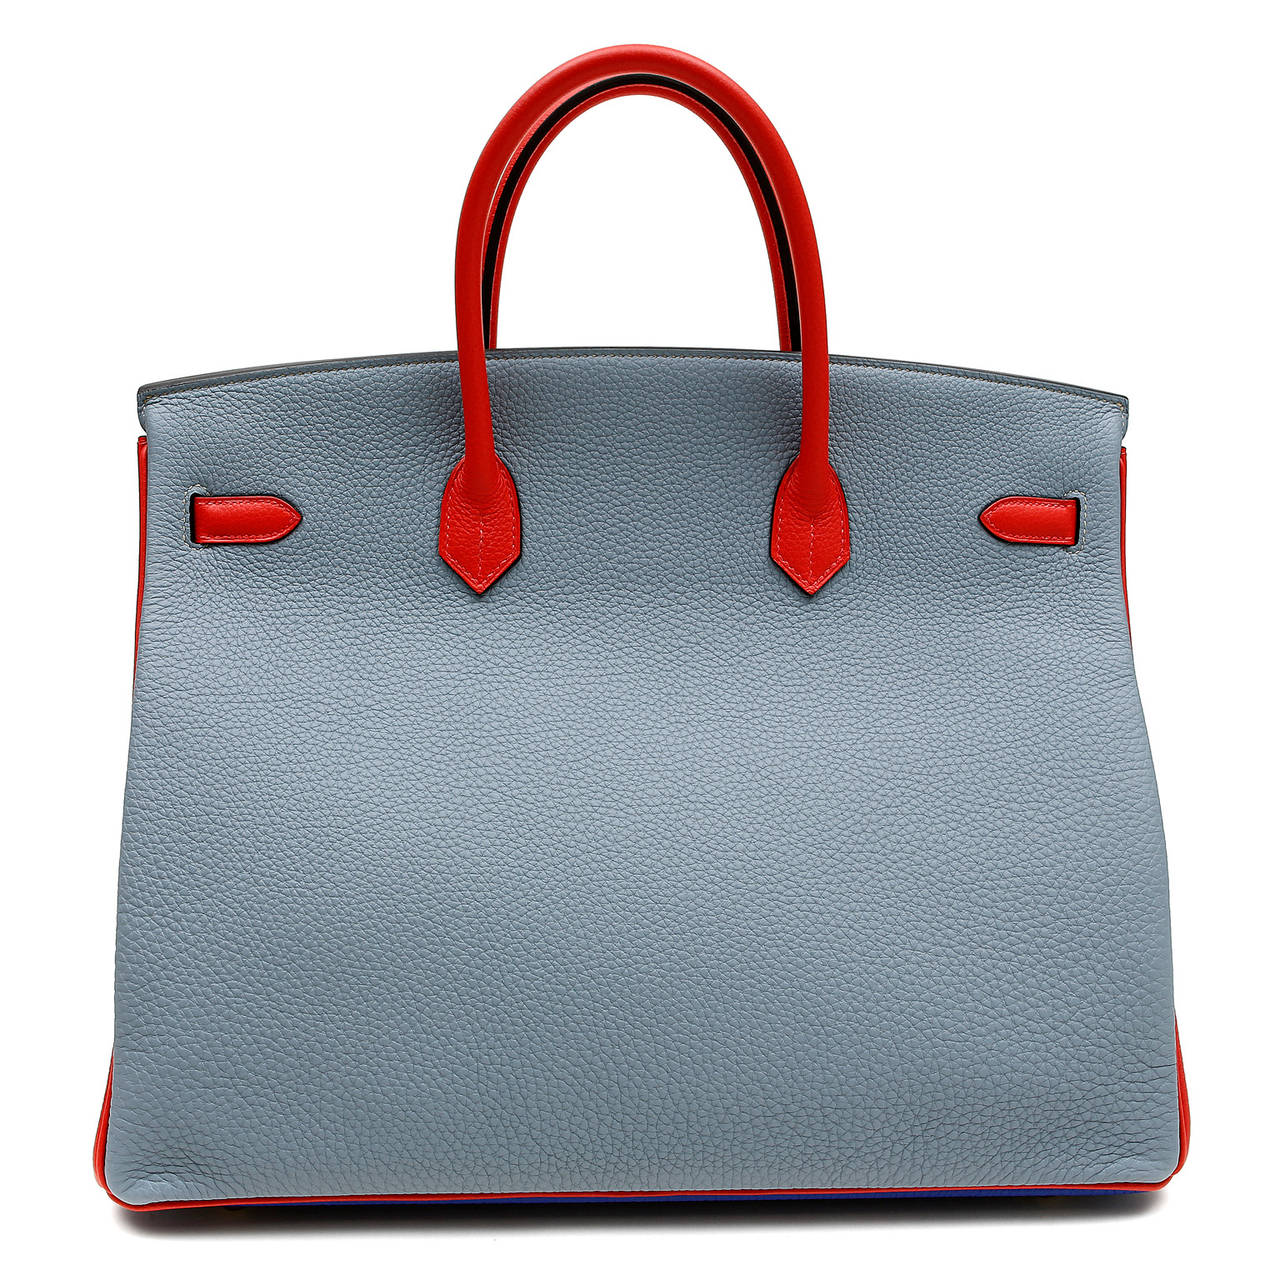 Hermès Tri Color Togo 40 cm Birkin Bag-  PRISTINE unworn condition with plastic intact on the hardware.  
Specially ordered as indicated by the horseshoe stamp, this one of a kind Birkin is a stunning collectible. 
 
Waitlists exceeding a year